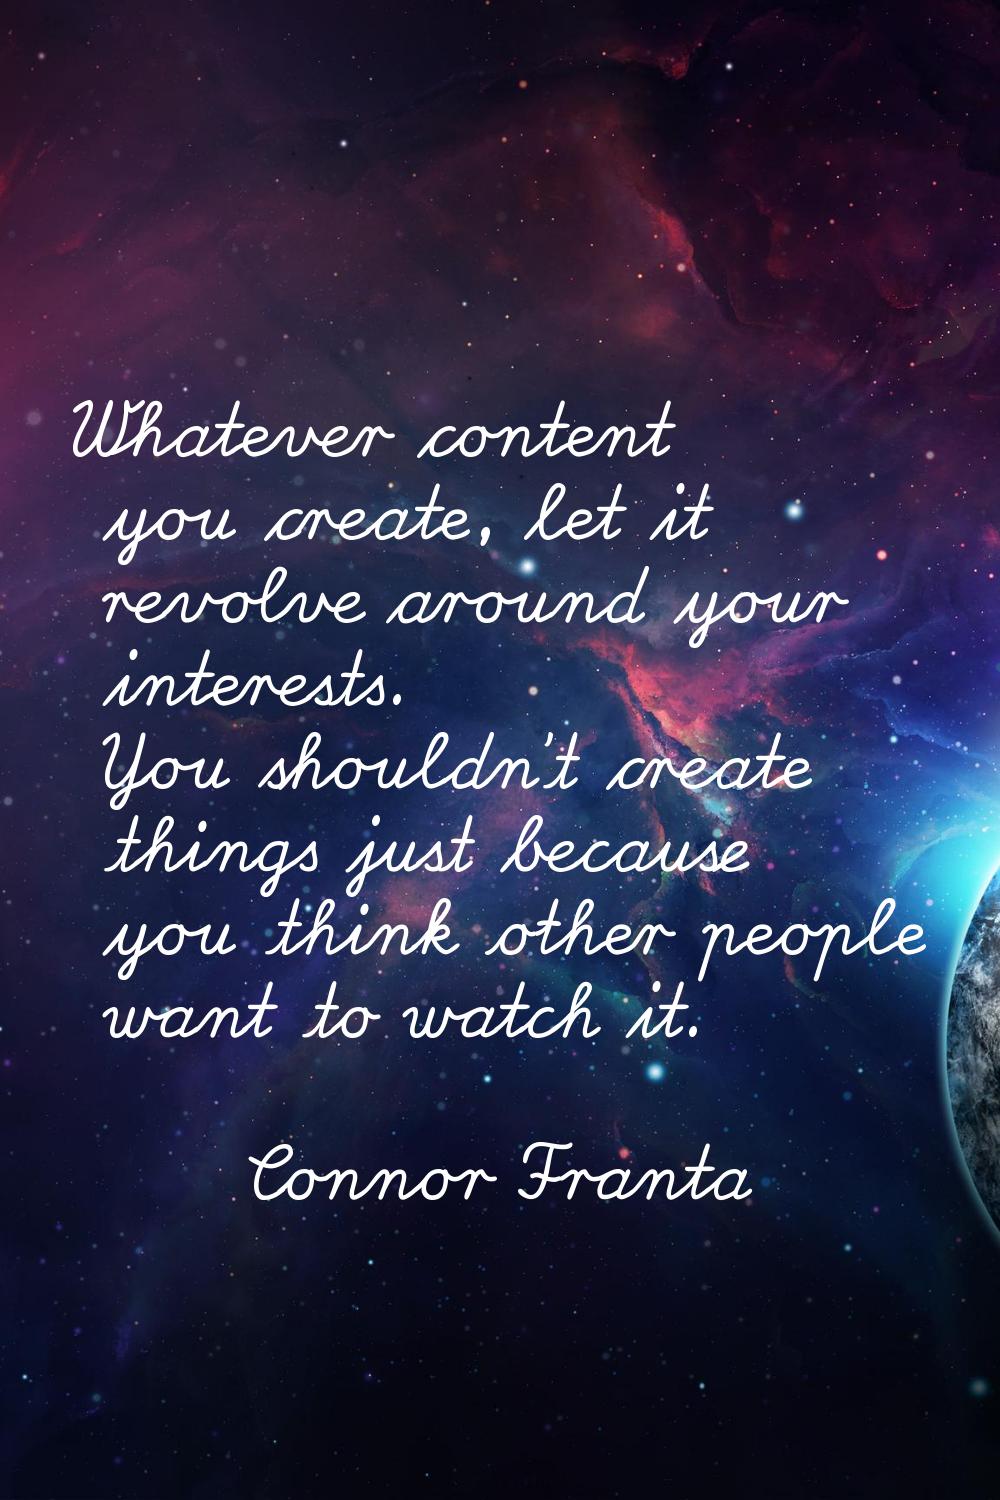 Whatever content you create, let it revolve around your interests. You shouldn't create things just